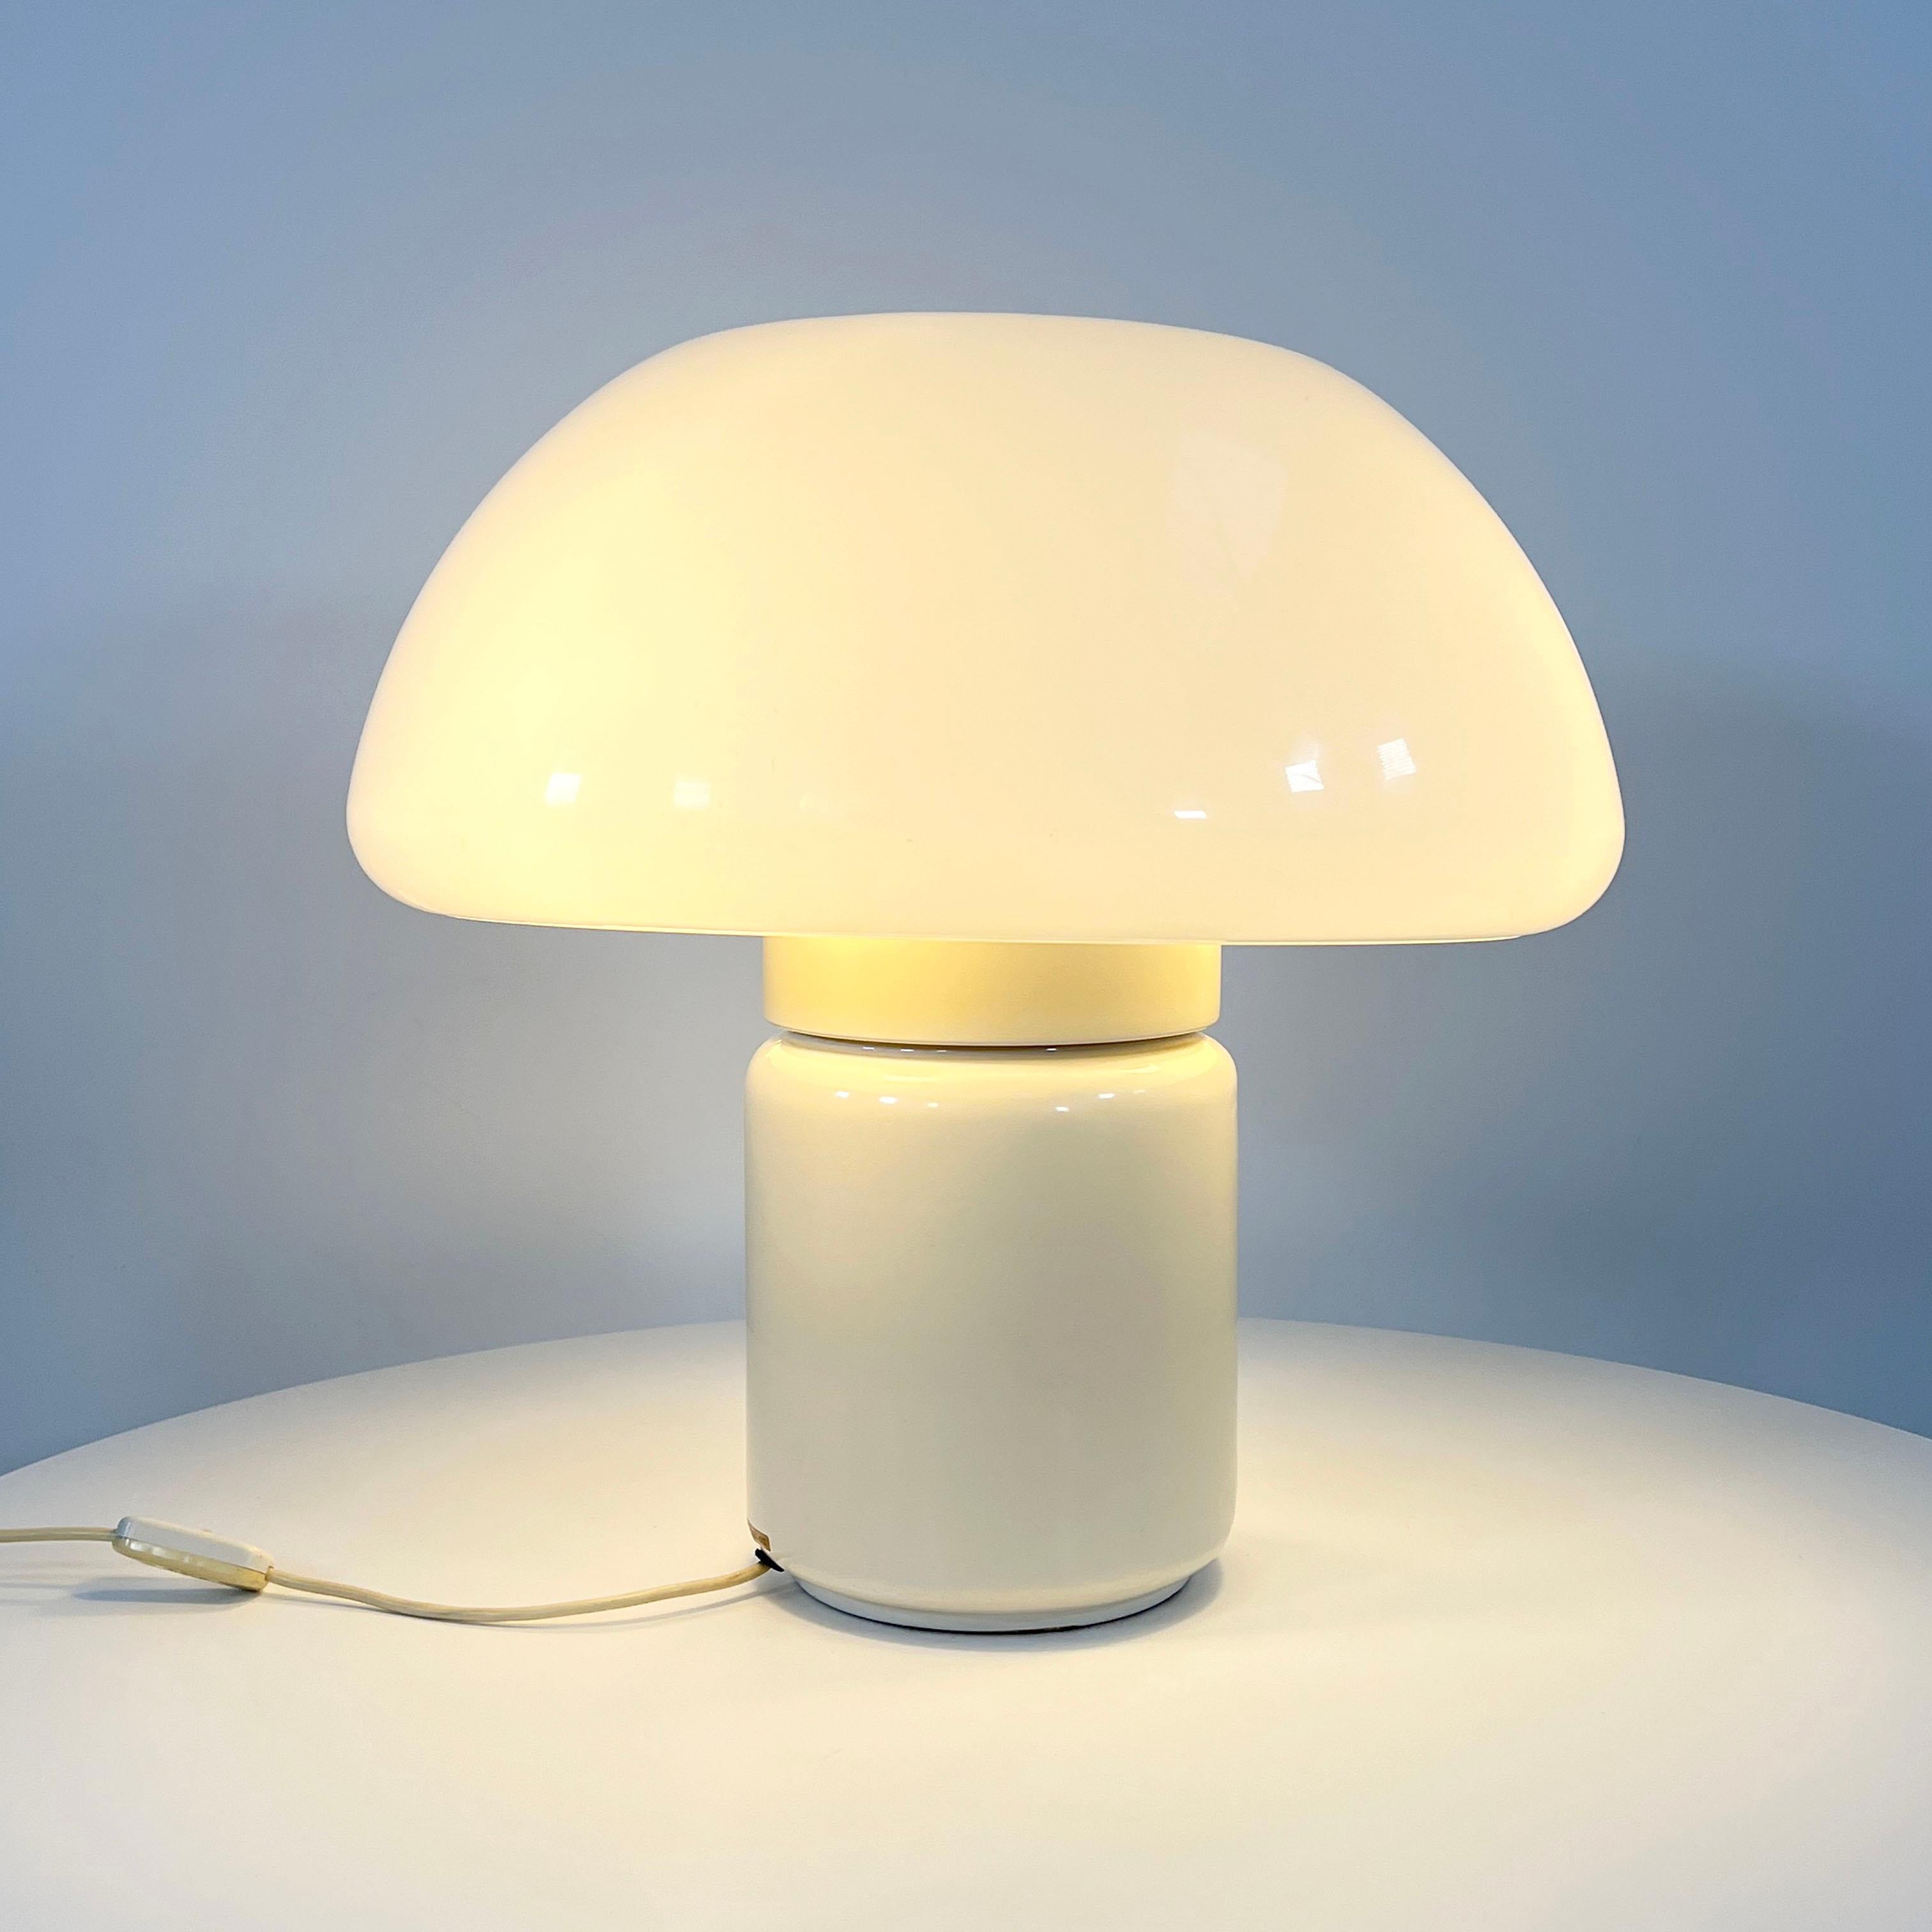 Designer - Elio Martinelli
Producer - Martinelli Luce
Model - Mushroom Table Lamp
Design Period - Seventies
Measurements - Width 50 cm x depth 50 cm x height 50 cm
Materials - Metal, Plastic
Color - White
Comments - Light wear consistent with age